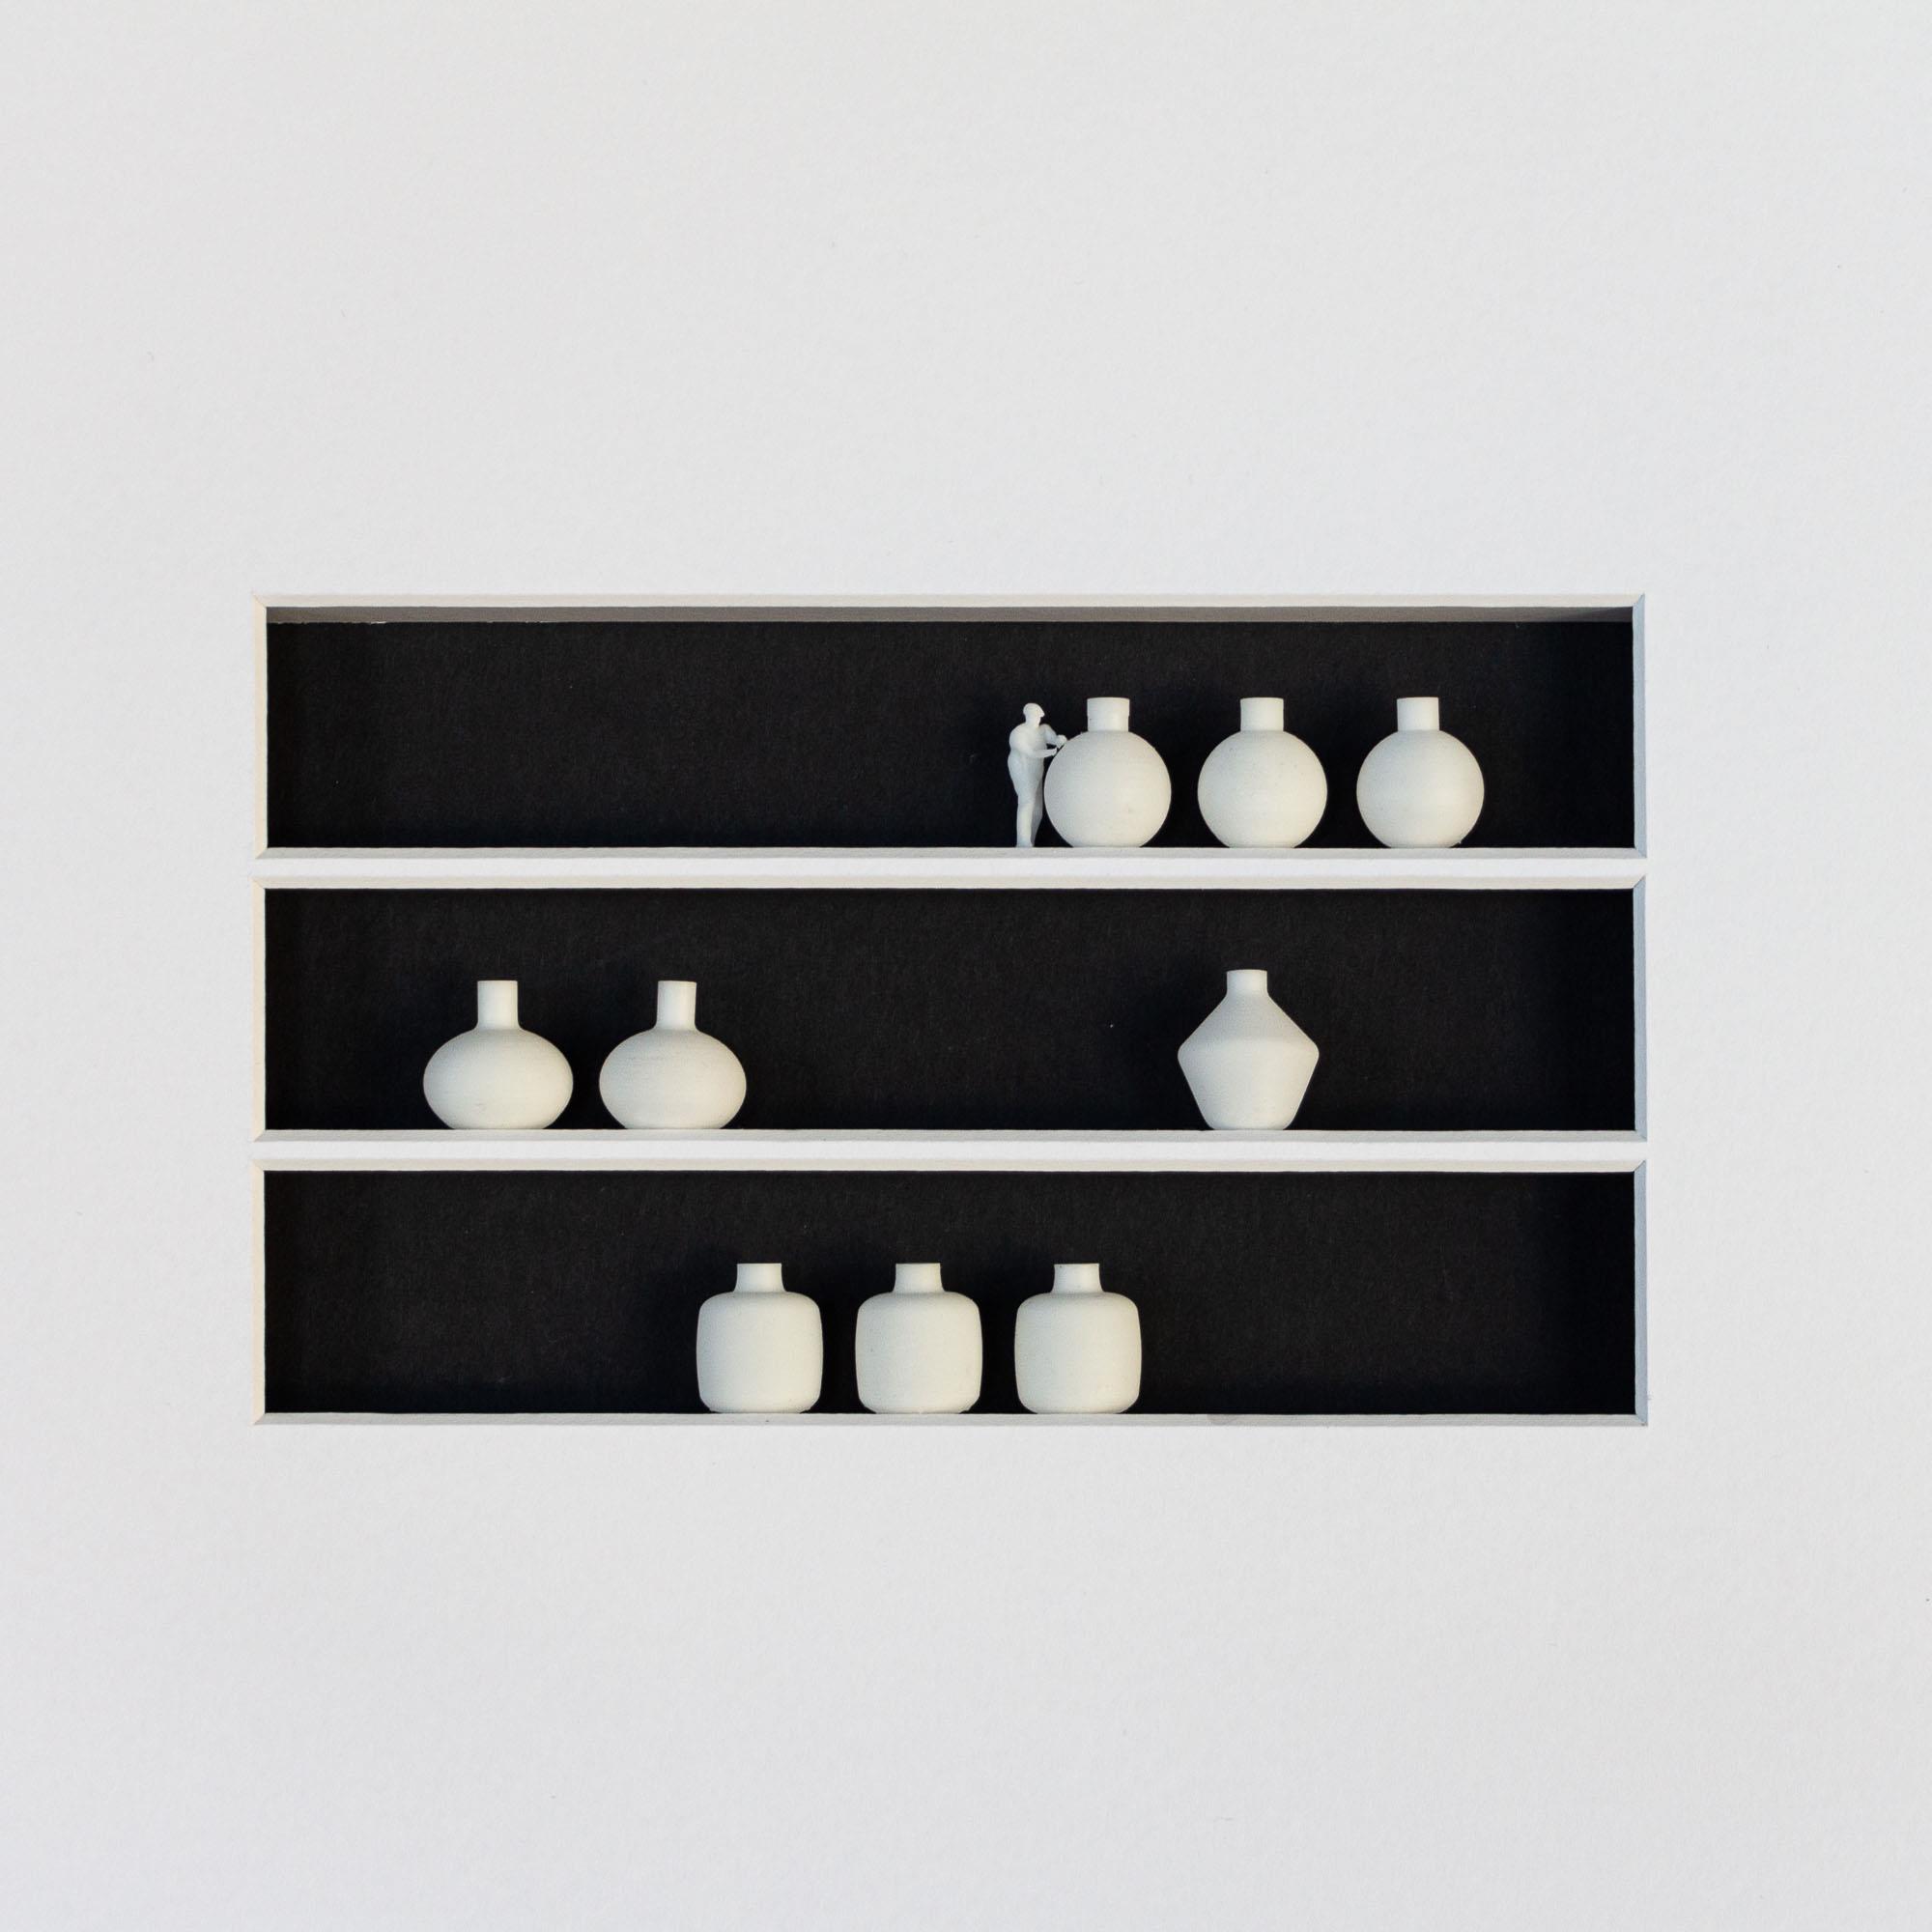 3d printed artwork of miniature person and vases in black frame